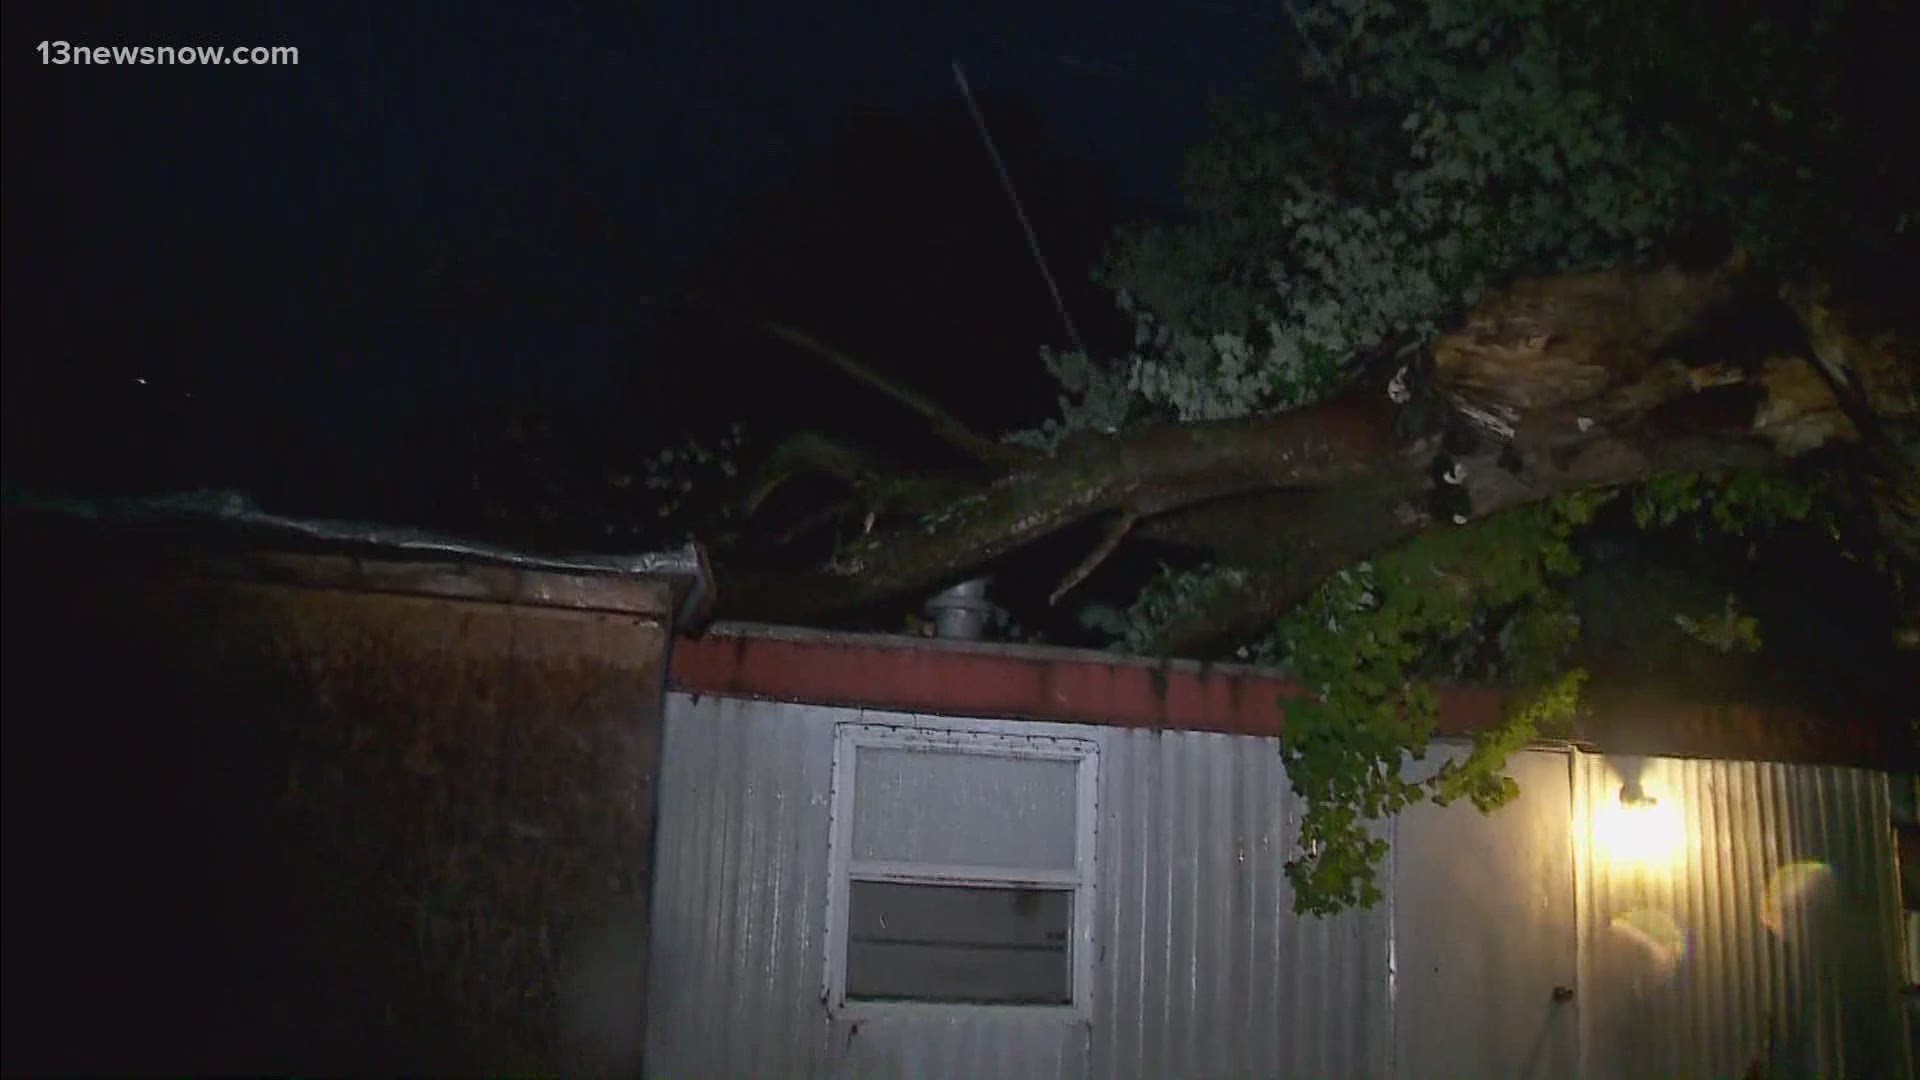 A huge tree fell on top of a trailer home in Poquoson.